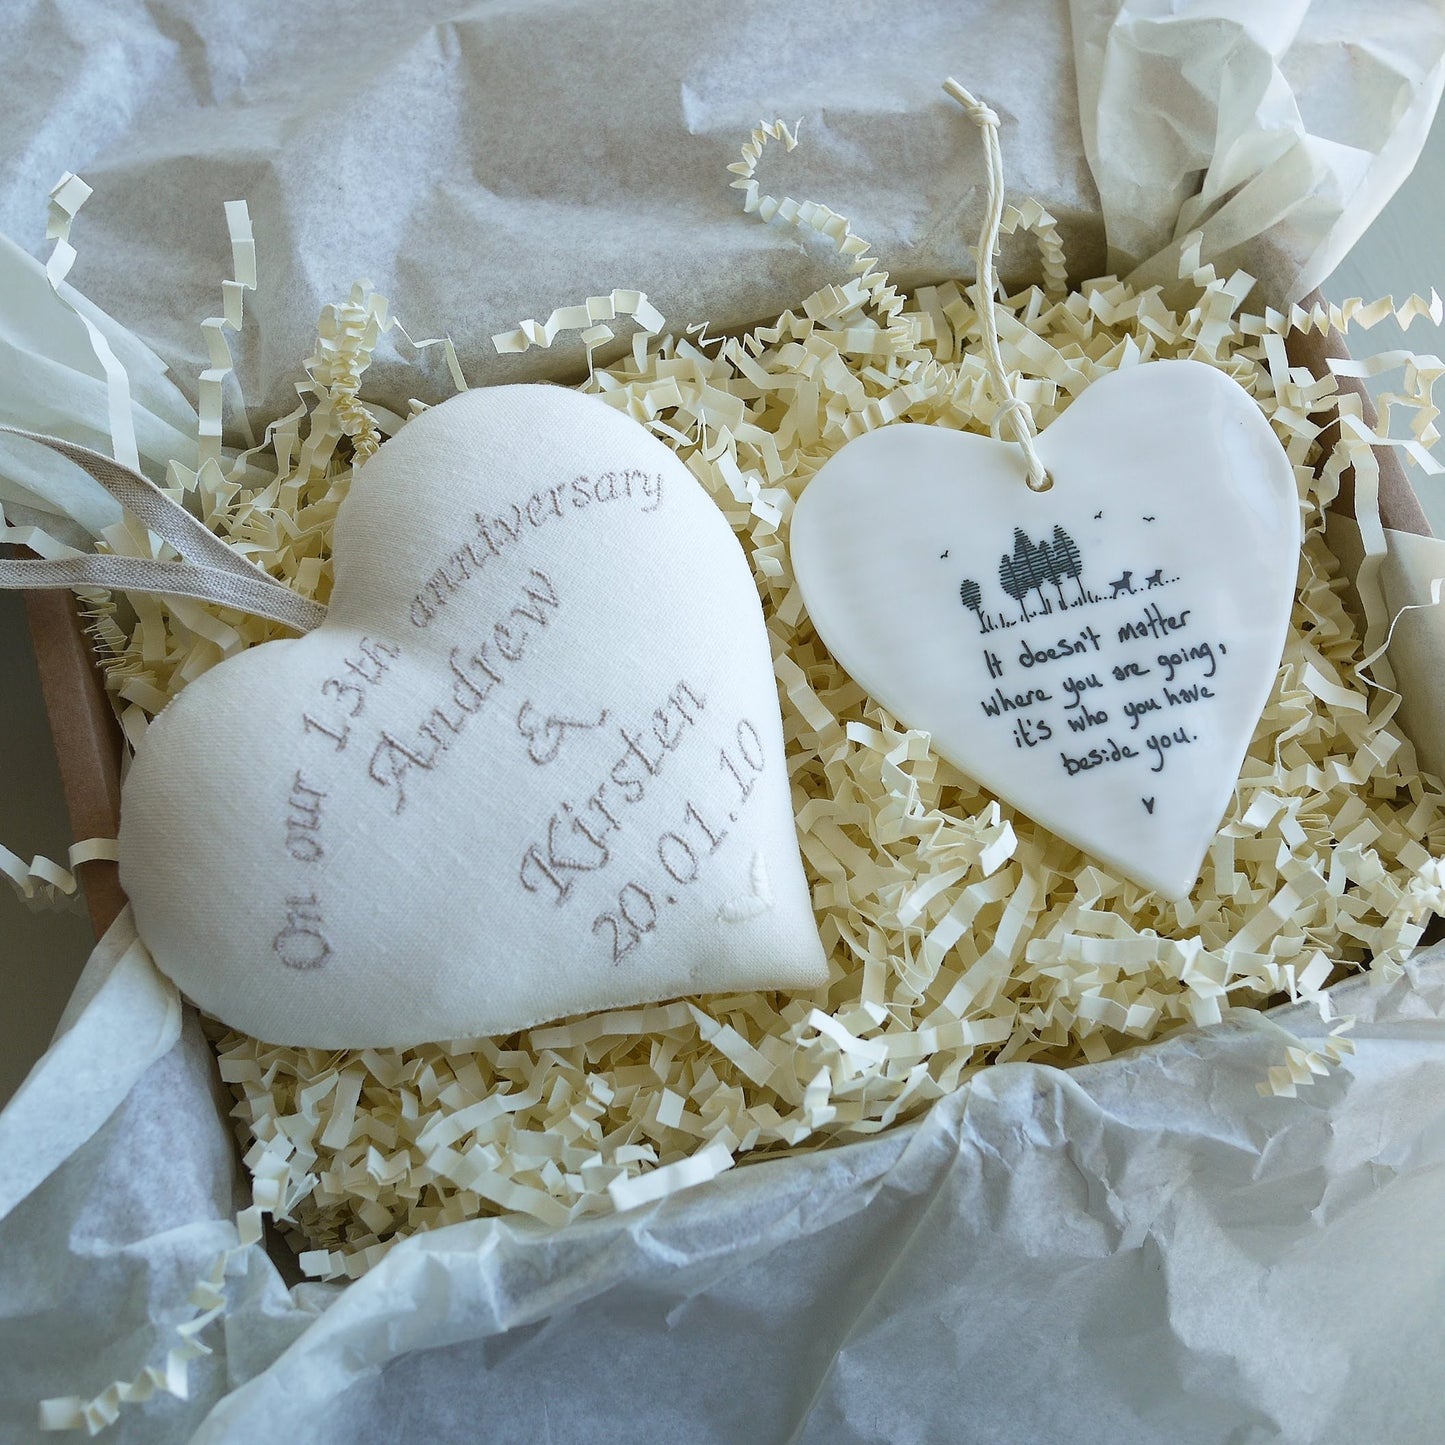 13th Lace Anniversary Personalised Gift Heart with Porcelain Heart Ornament Prep collection